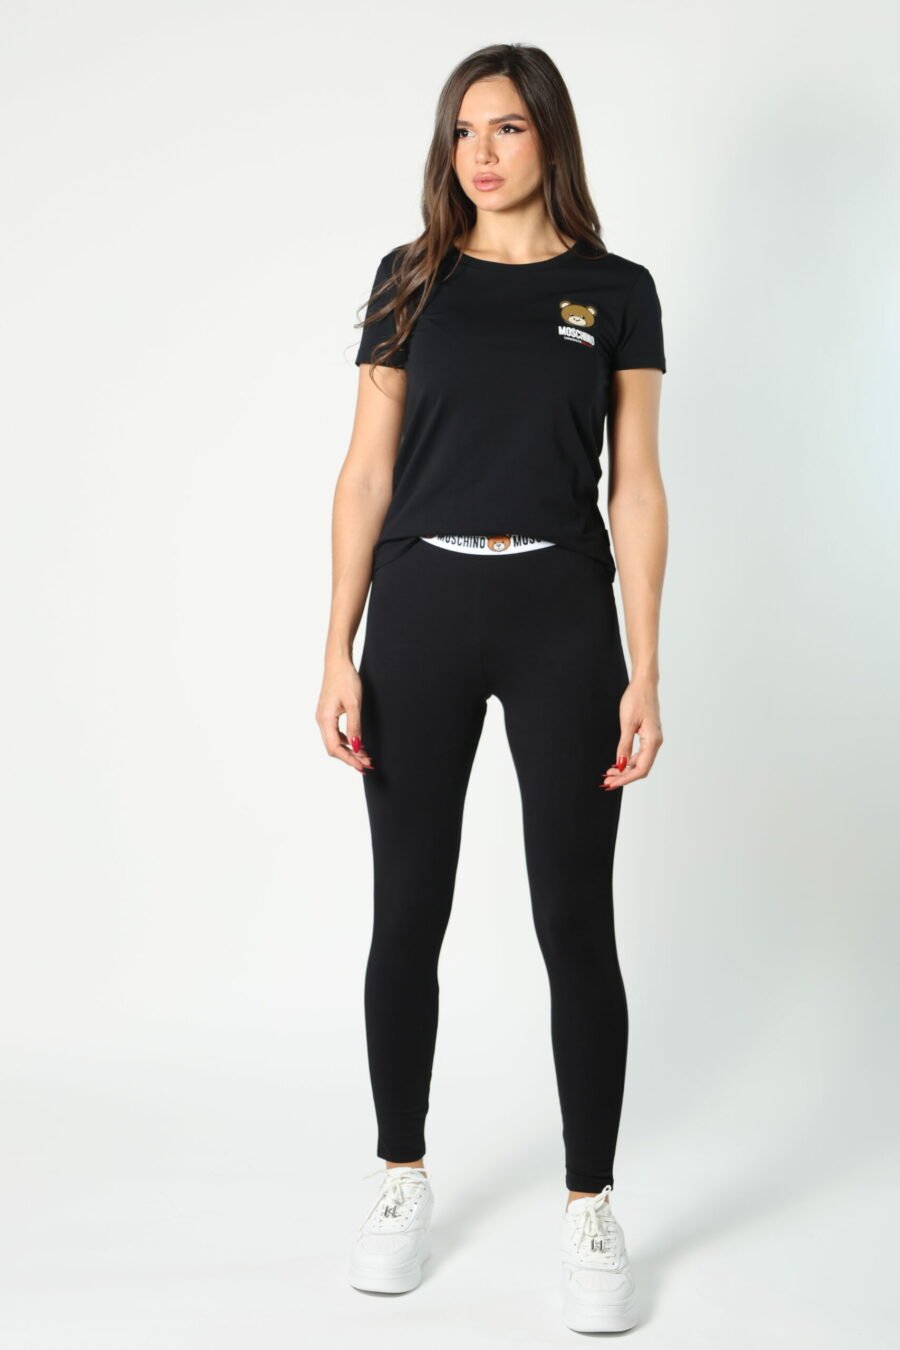 Tracksuit bottoms black with logo on waistband - 8052865435499 54 scaled